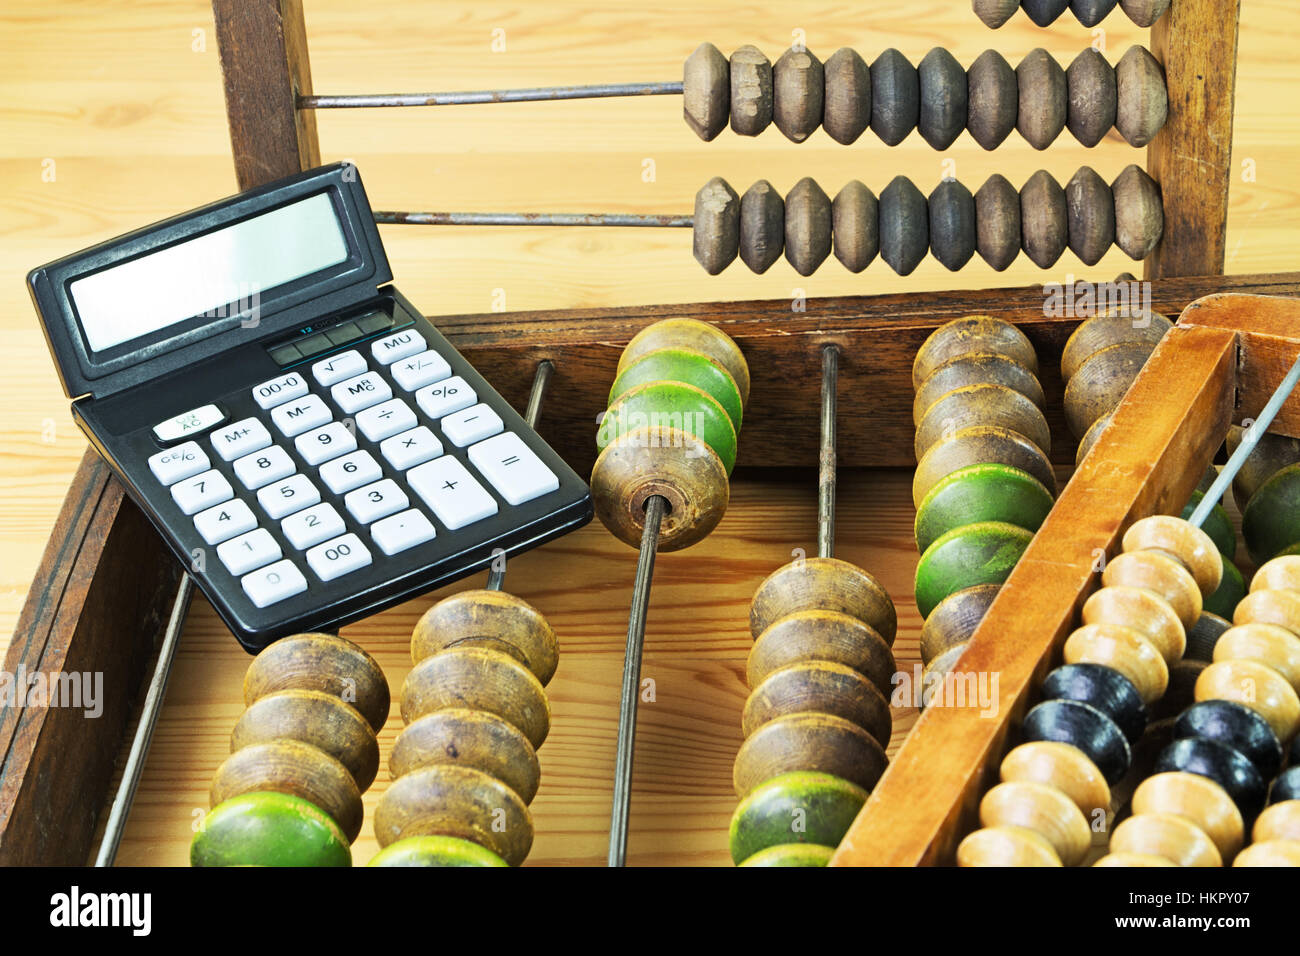 Old wooden abacus and the calculator Stock Photo